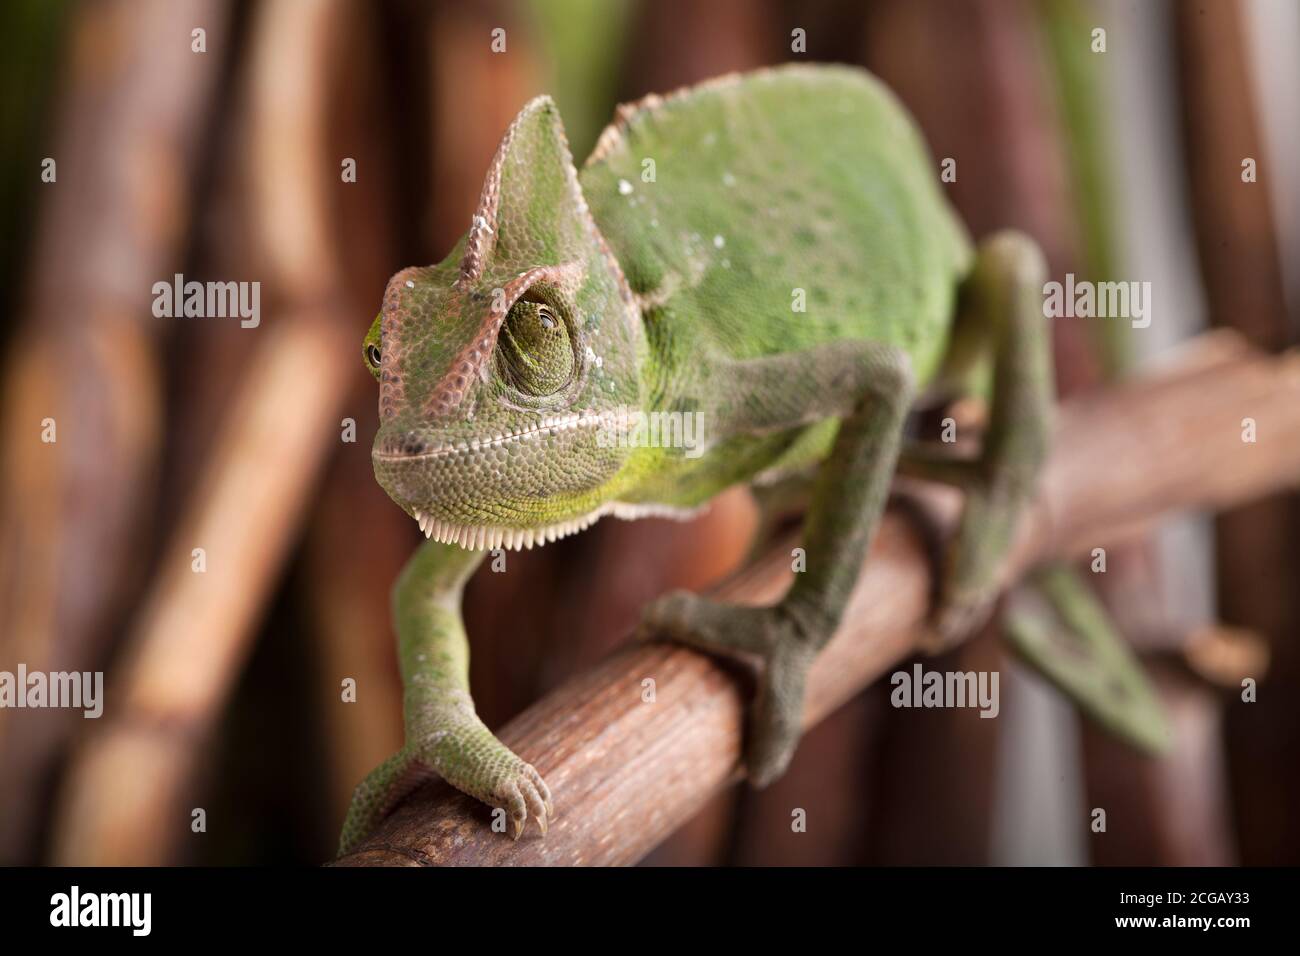 Closeup of green chameleon walking on bamboo stick. Natural environment in background. Stock Photo